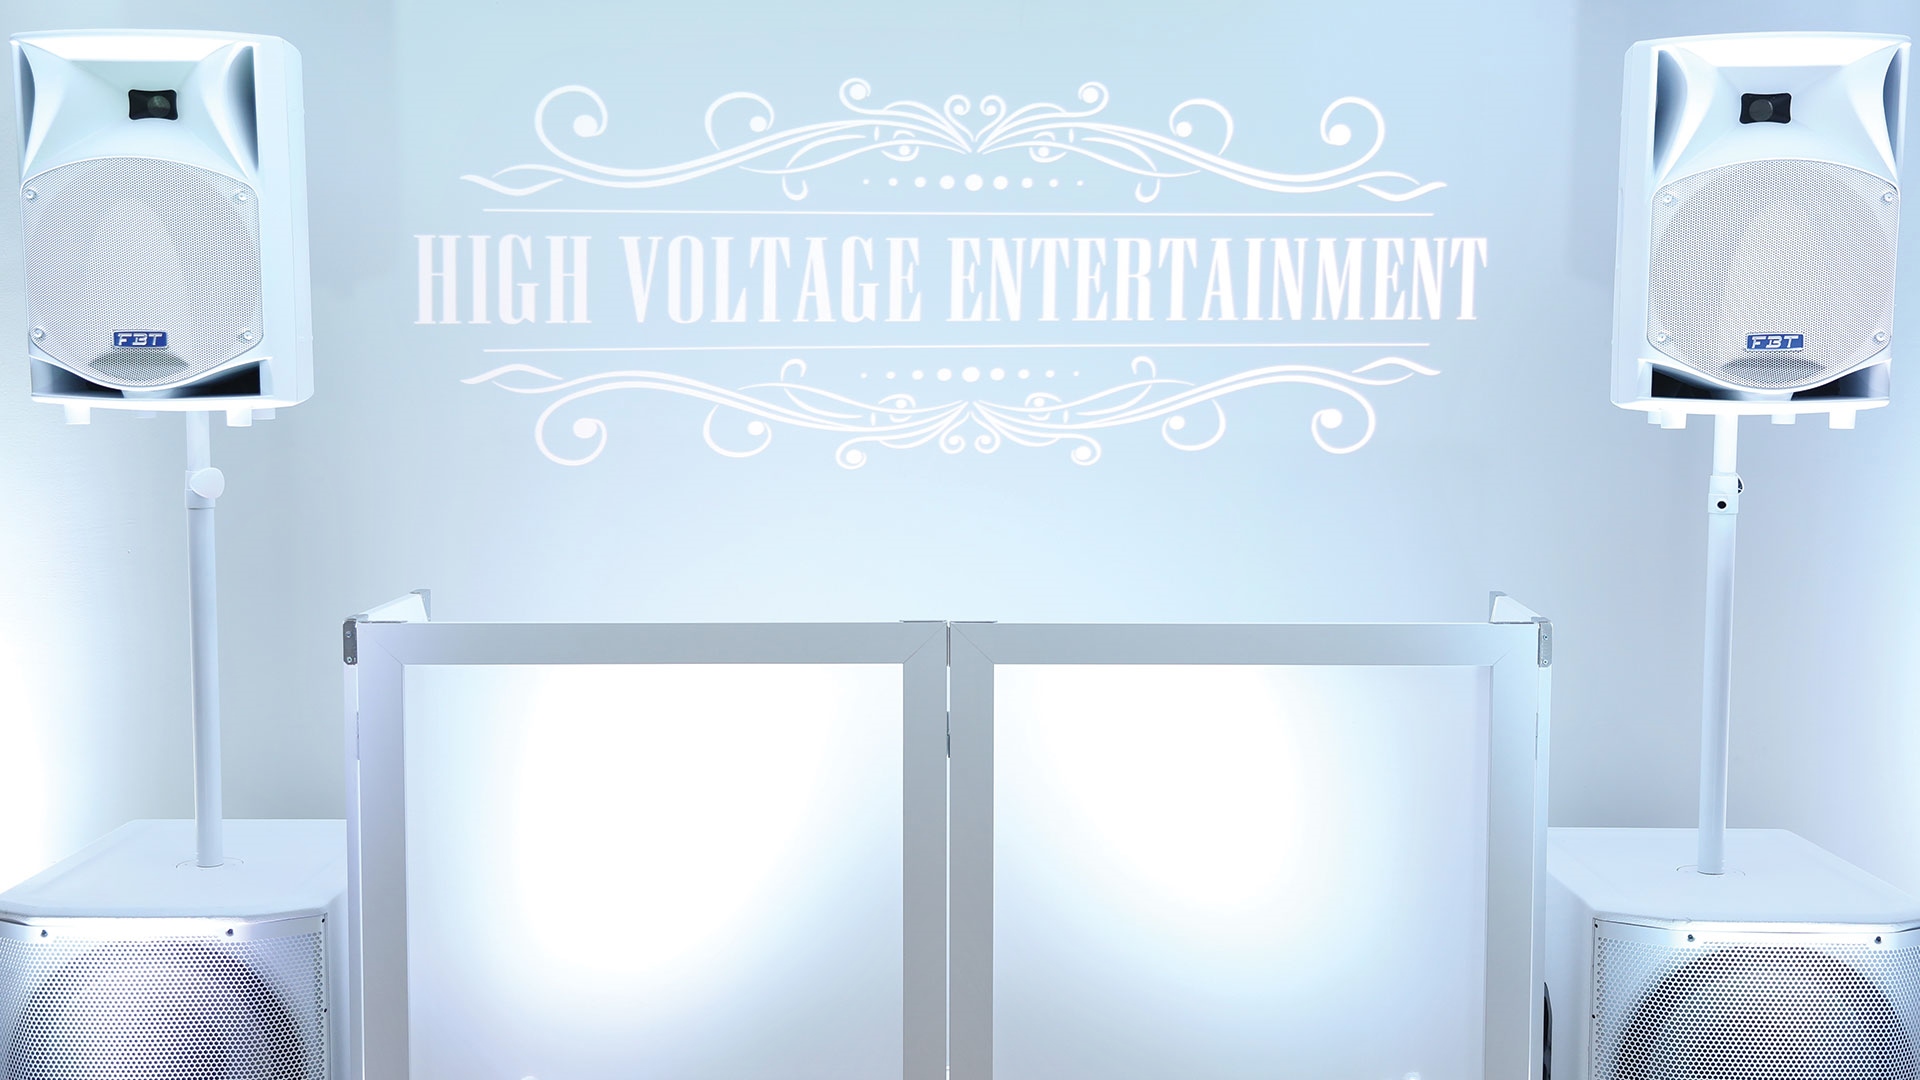 HIGH VOLTAGE ENTERTAINMENT | THE VIDEOS ARE UP!